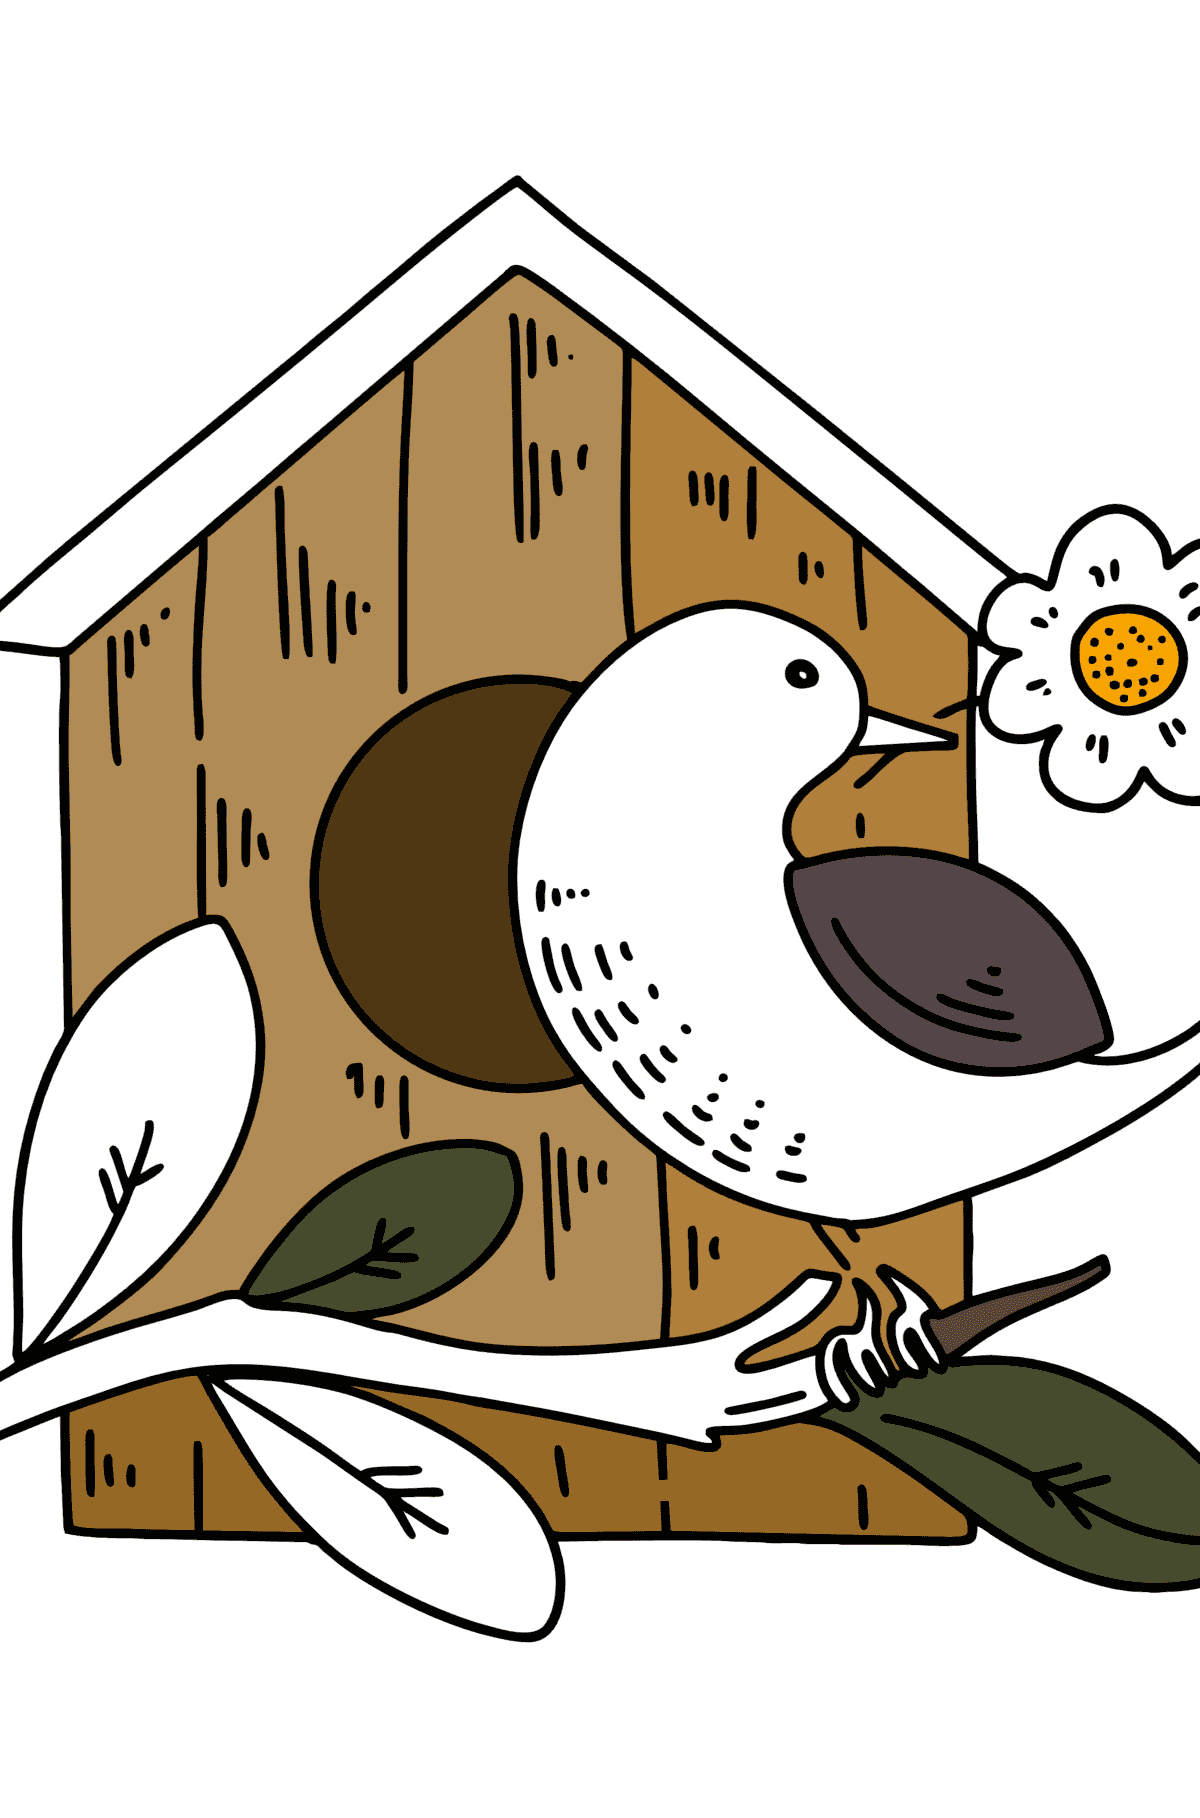 Starling at the Birdhouse coloring page - Coloring Pages for Kids